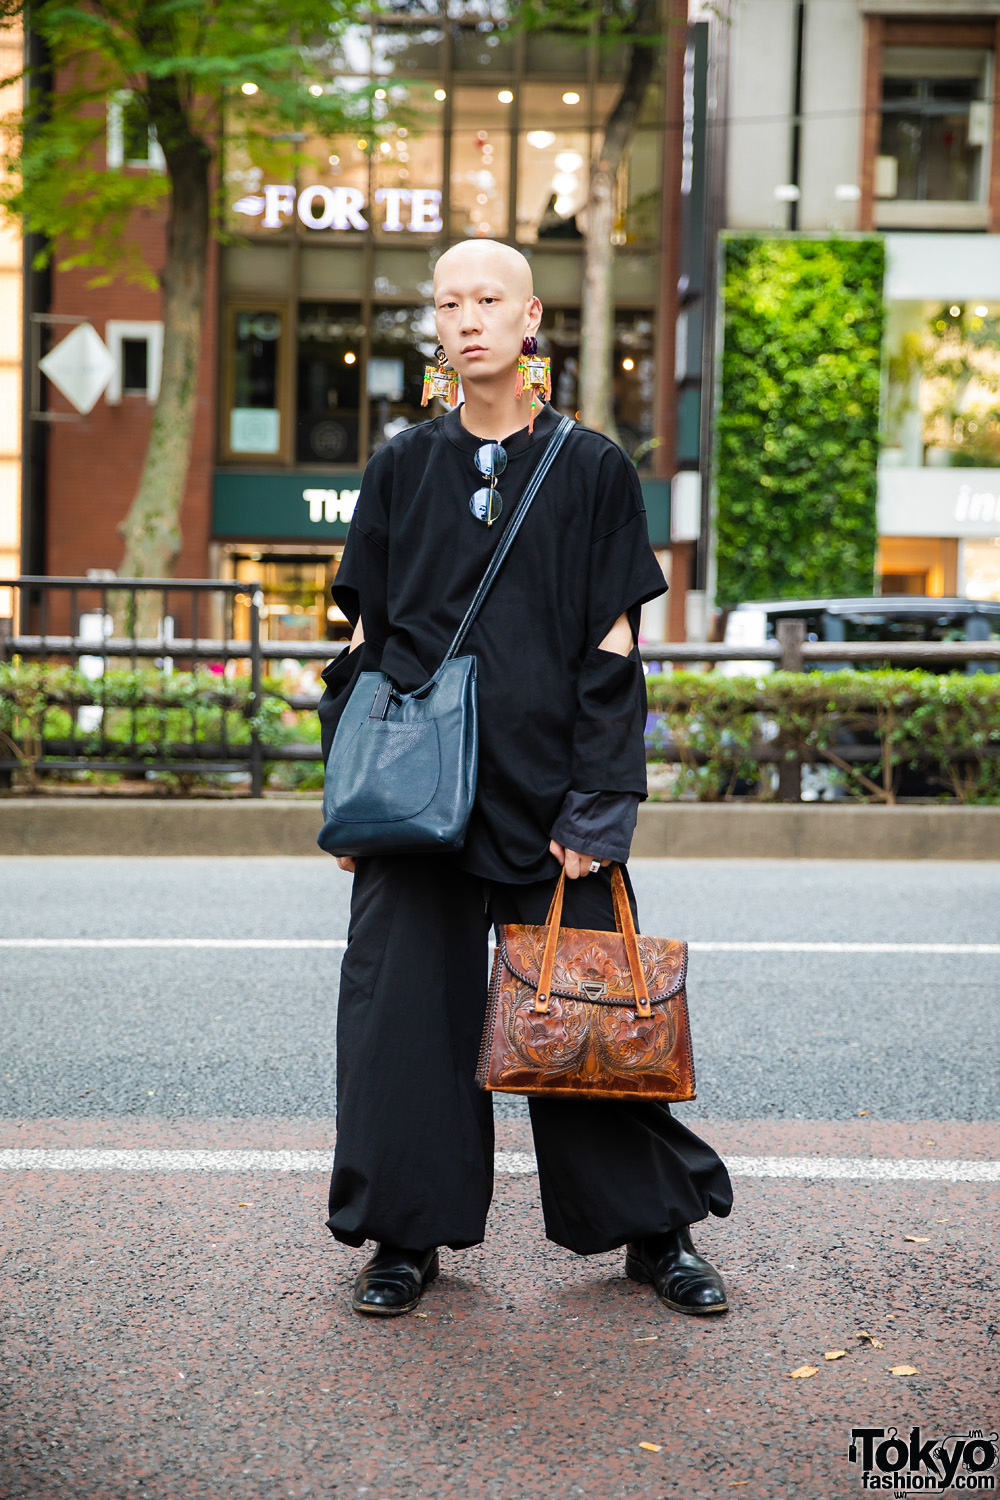 Musician/Model in All Black Fashion w/ Prologue-G Long Sleeves, Depression Balloon Pants, Loake Leather Shoes, Vintage Bags, Balenciaga Accessories & Handmade Earrings